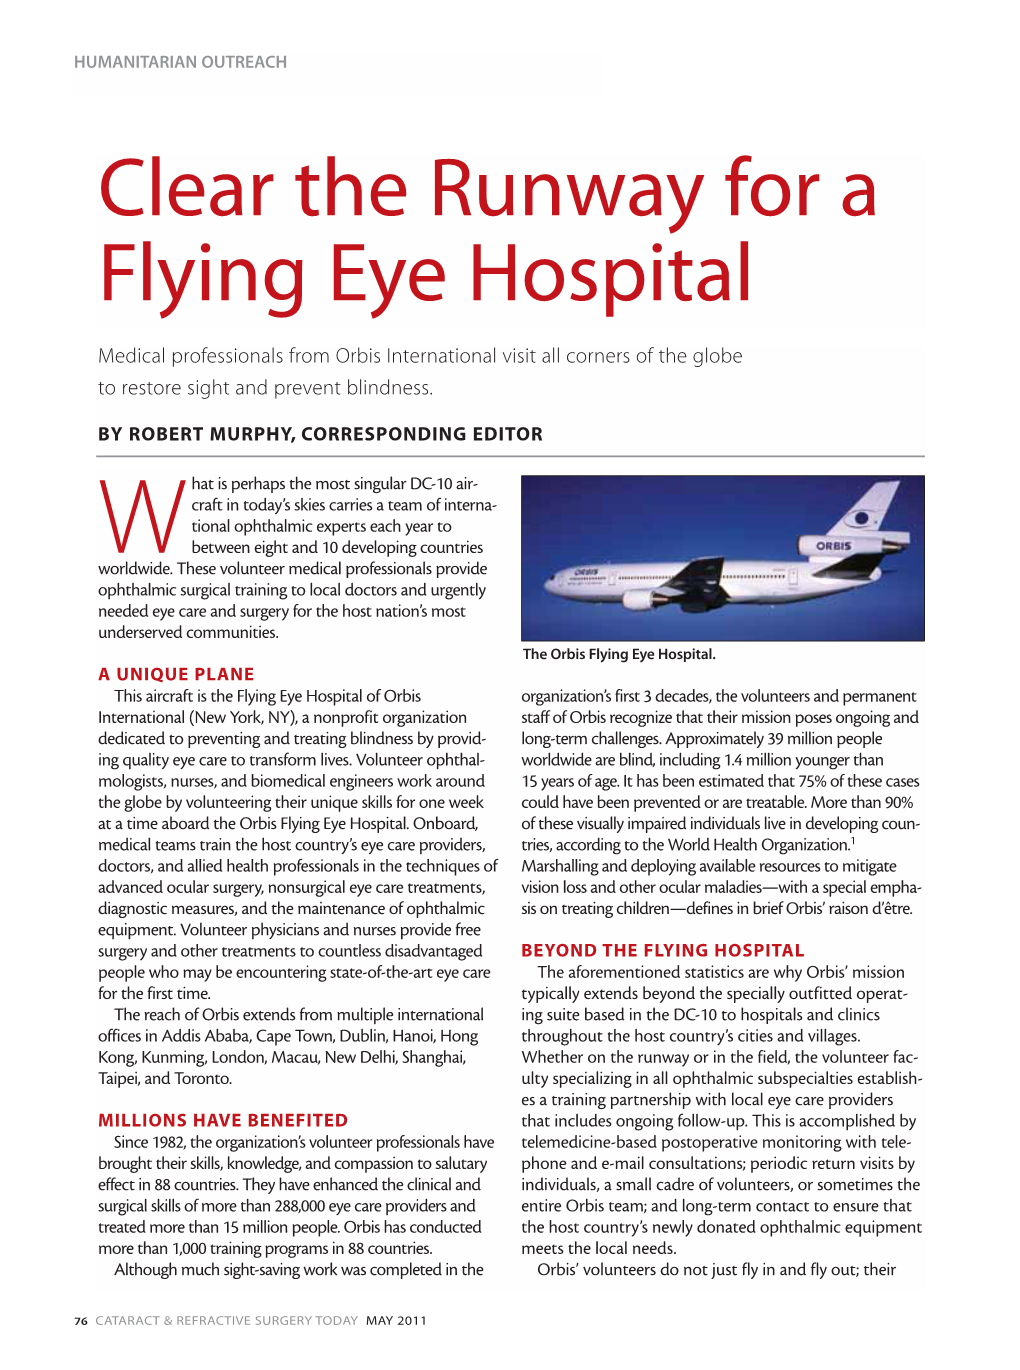 Clear the Runway for a Flying Eye Hospital